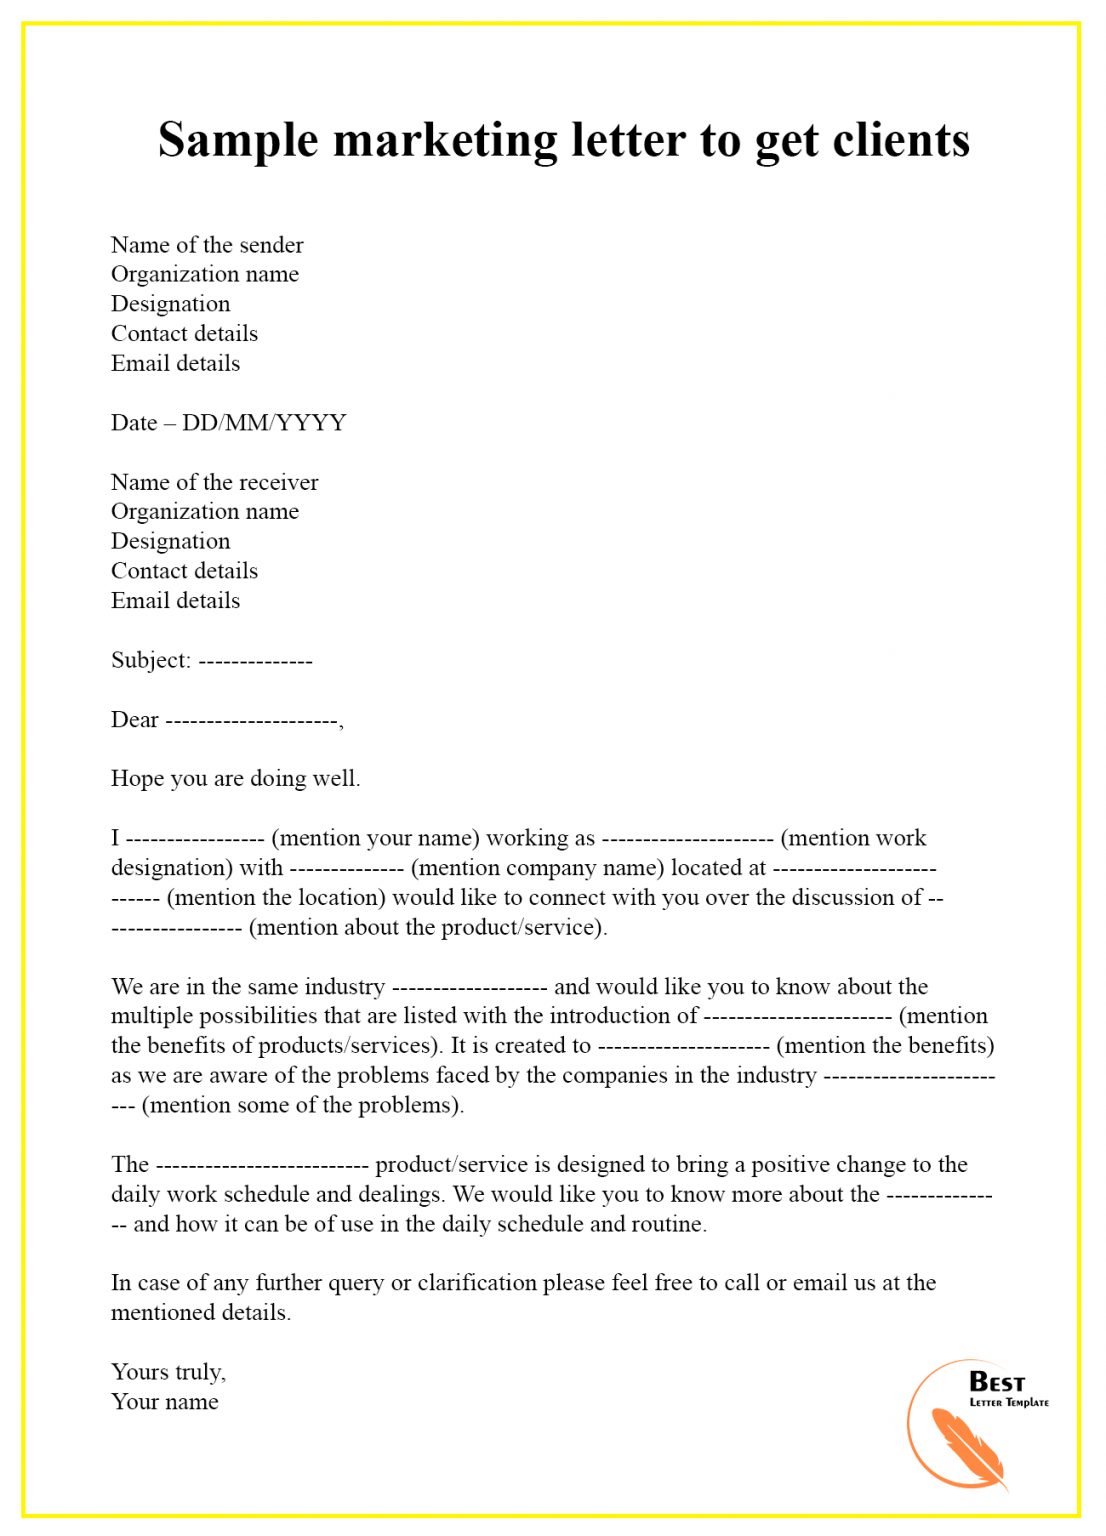 8-free-marketing-letter-template-format-sample-example